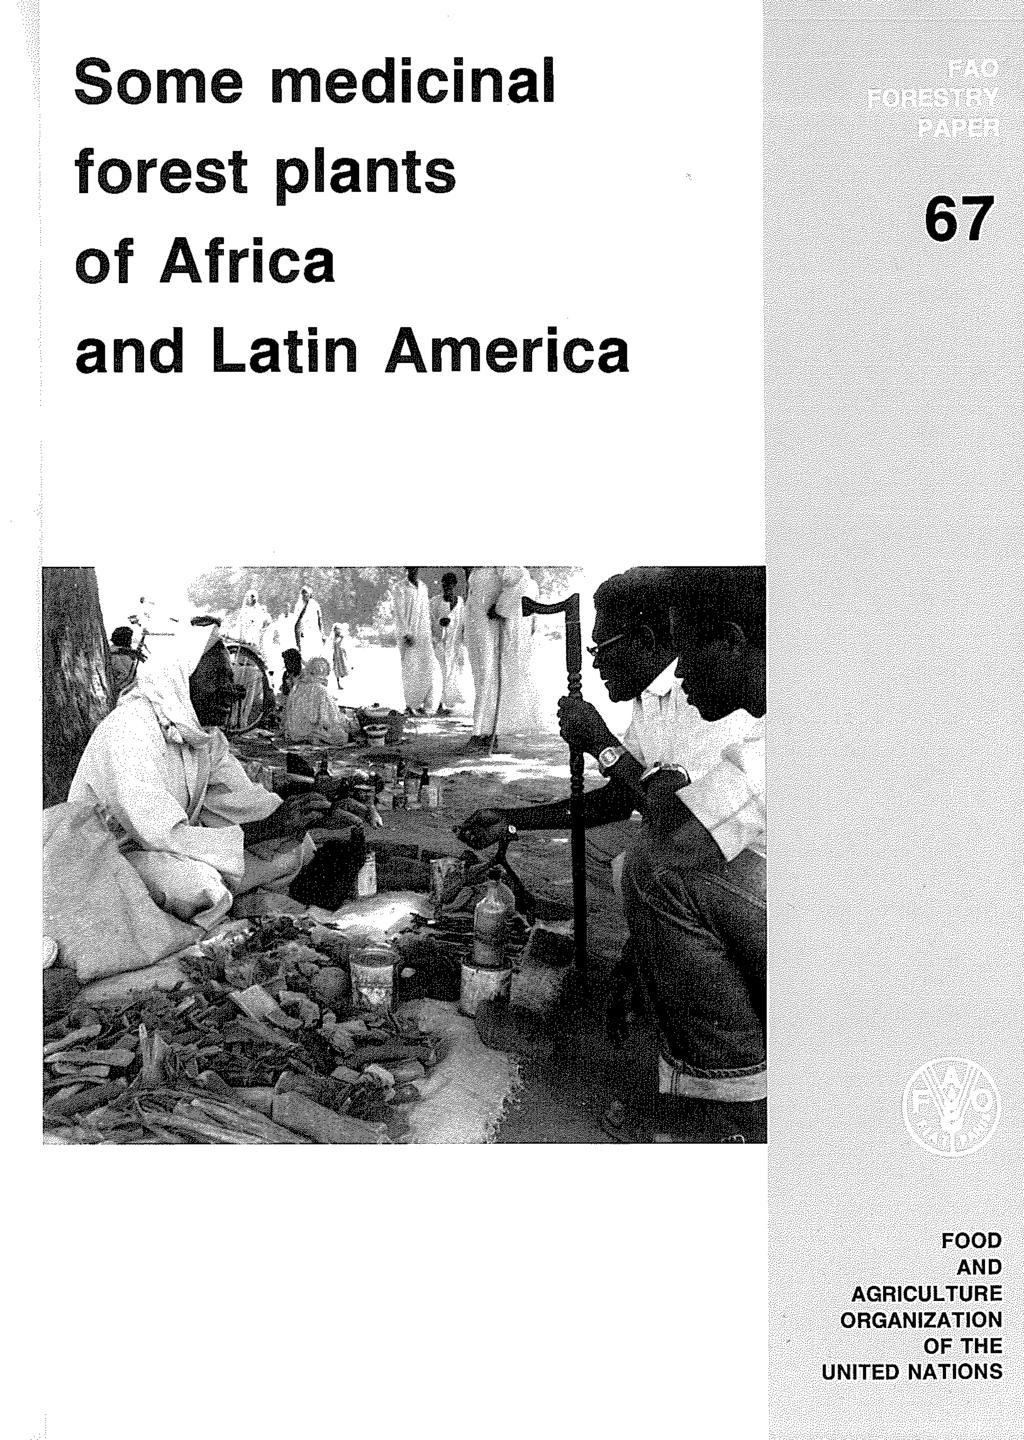 Some medicinal forest plants of Africa 67 and Latin